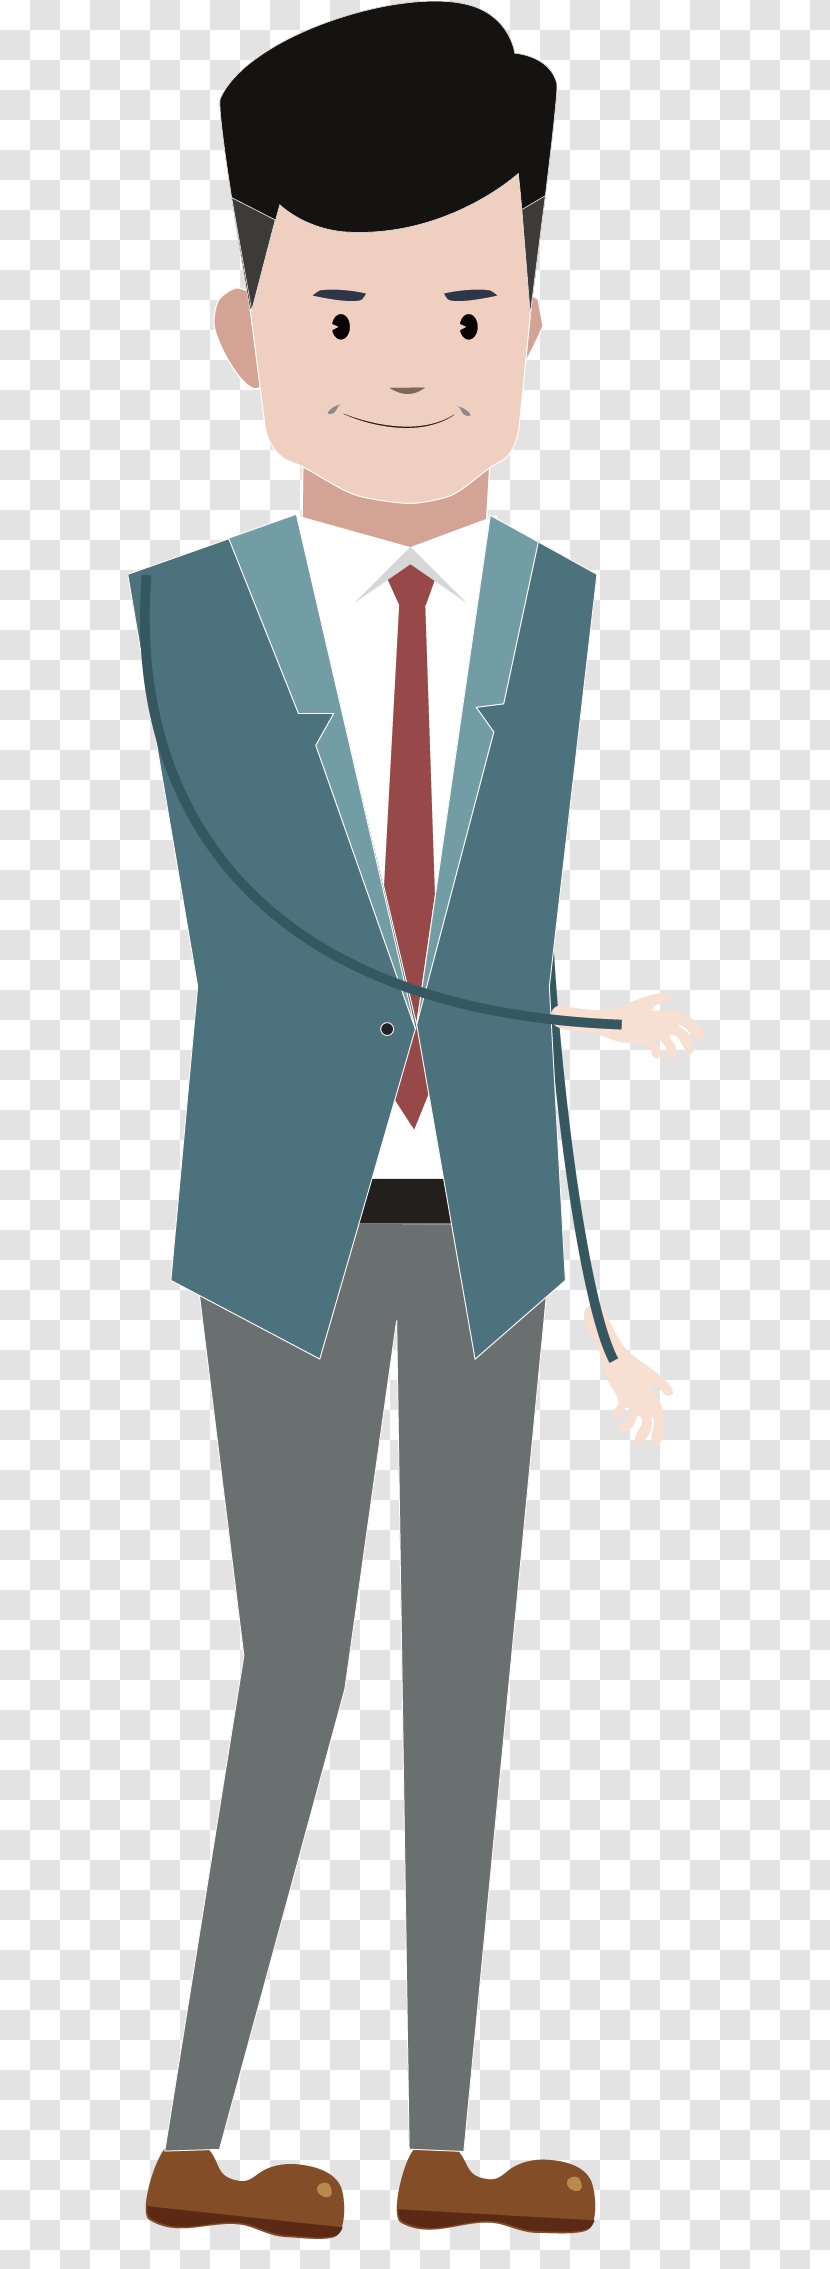 Download - Watercolor - The Man Of Transparent PNG